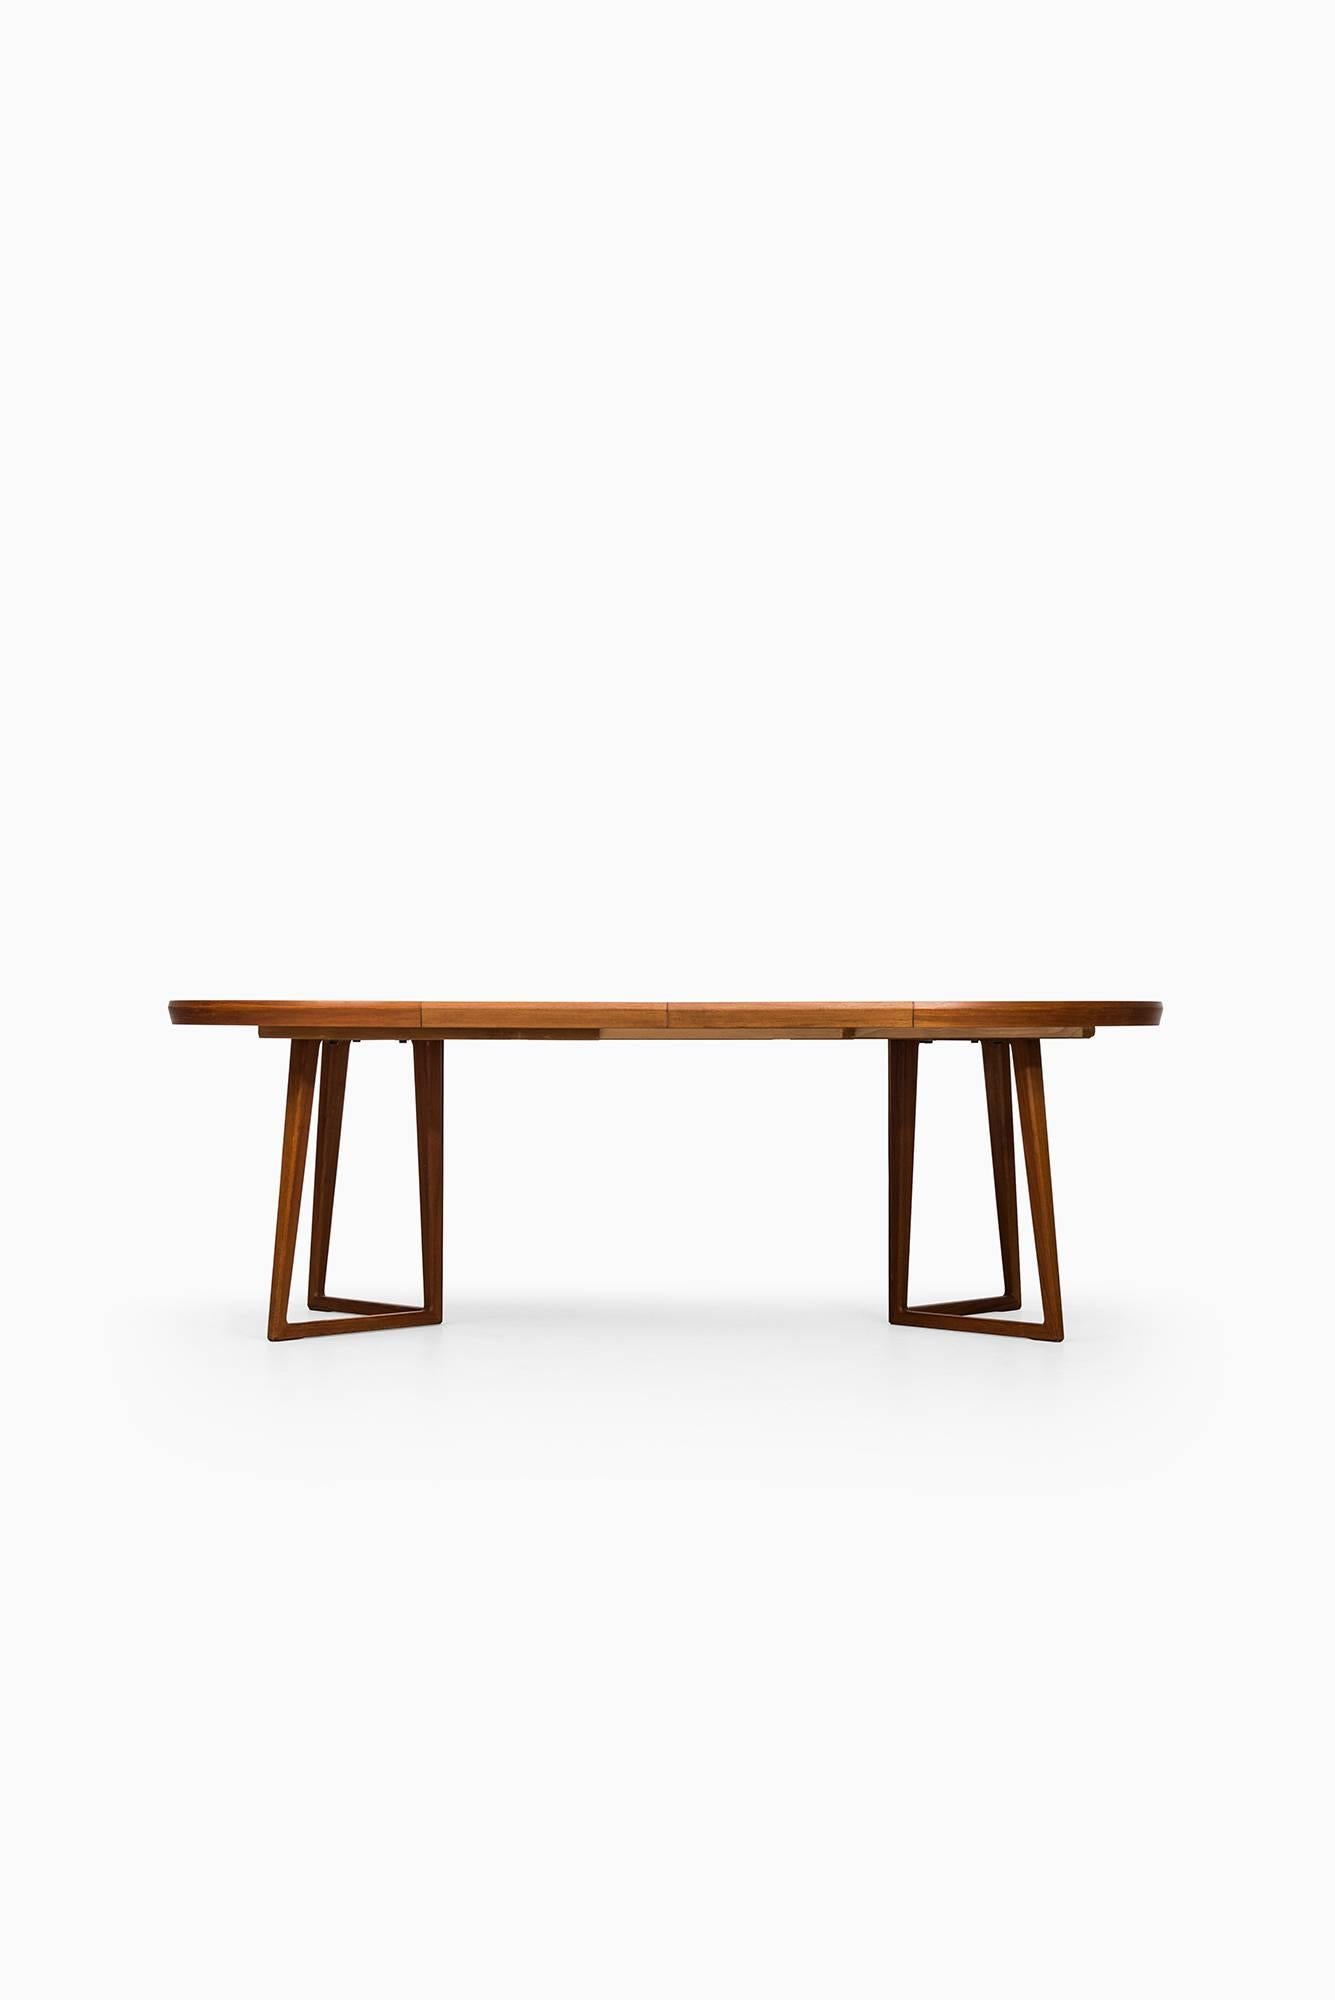 Helge Sibast Dining Table in Teak by Sibast Møbler in Denmark In Excellent Condition In Limhamn, Skåne län